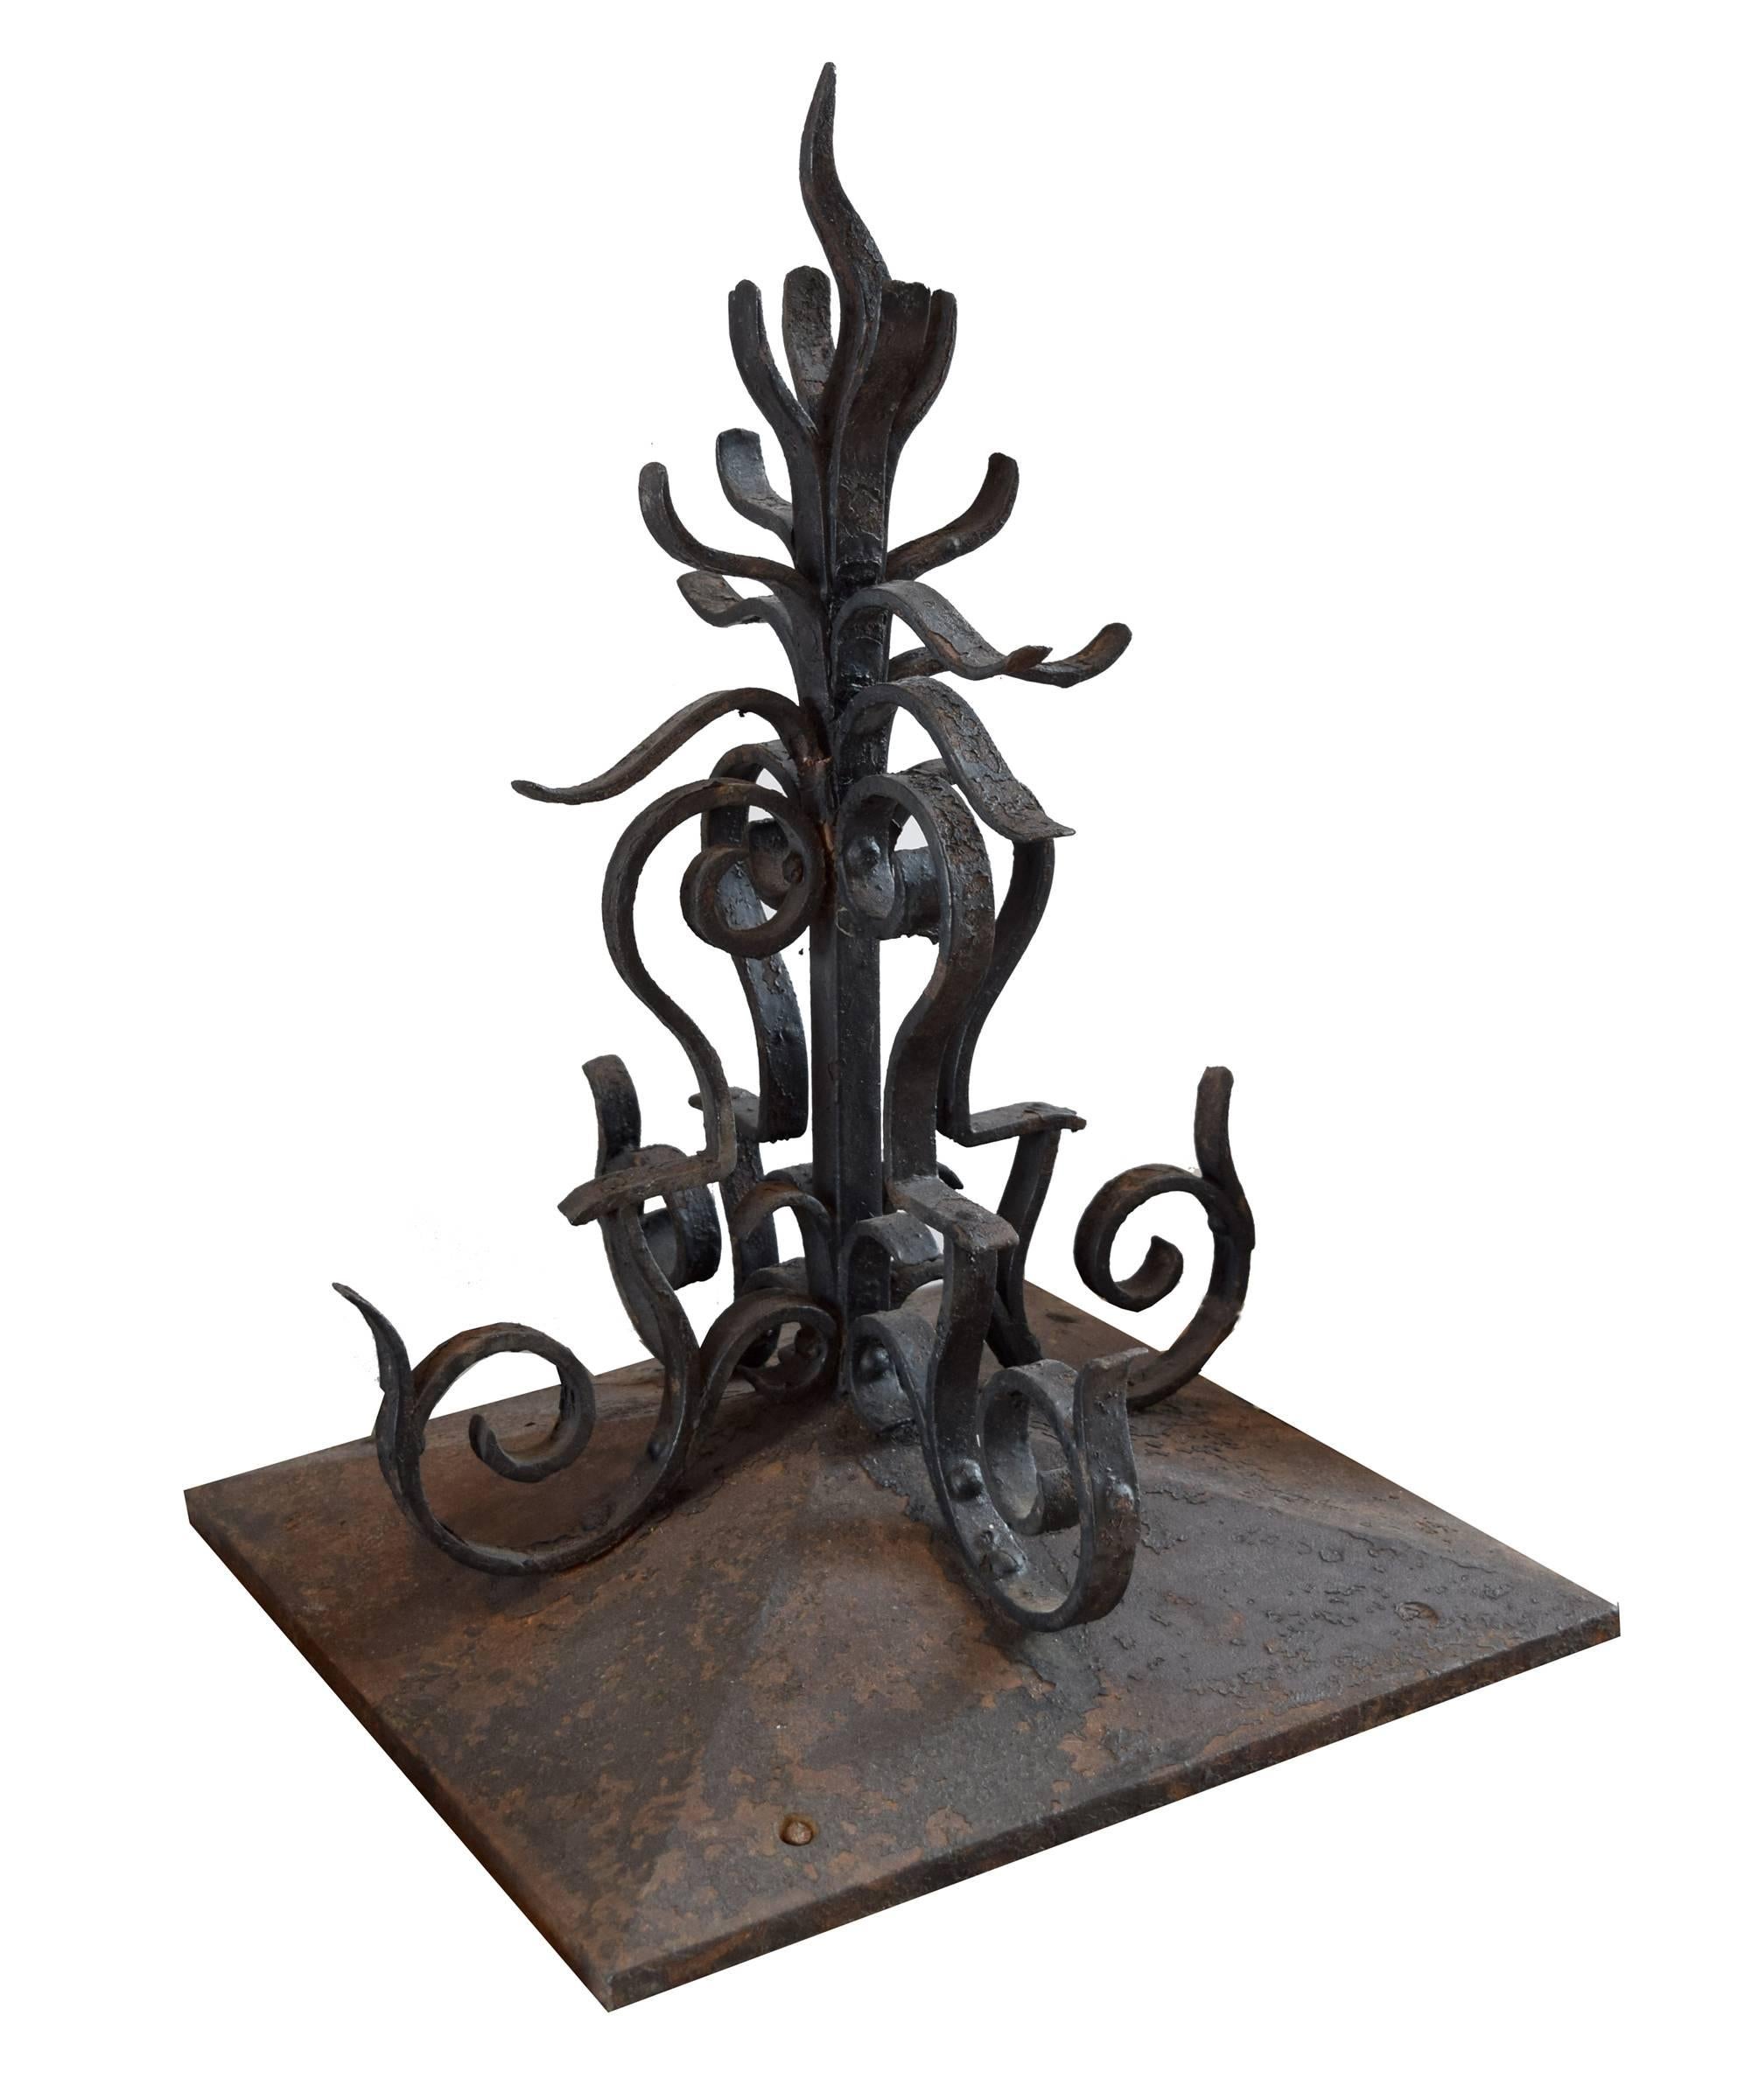 Pair of American wrought iron decorative finials with wonderful scrolling forms on square bases, circa 1880s.